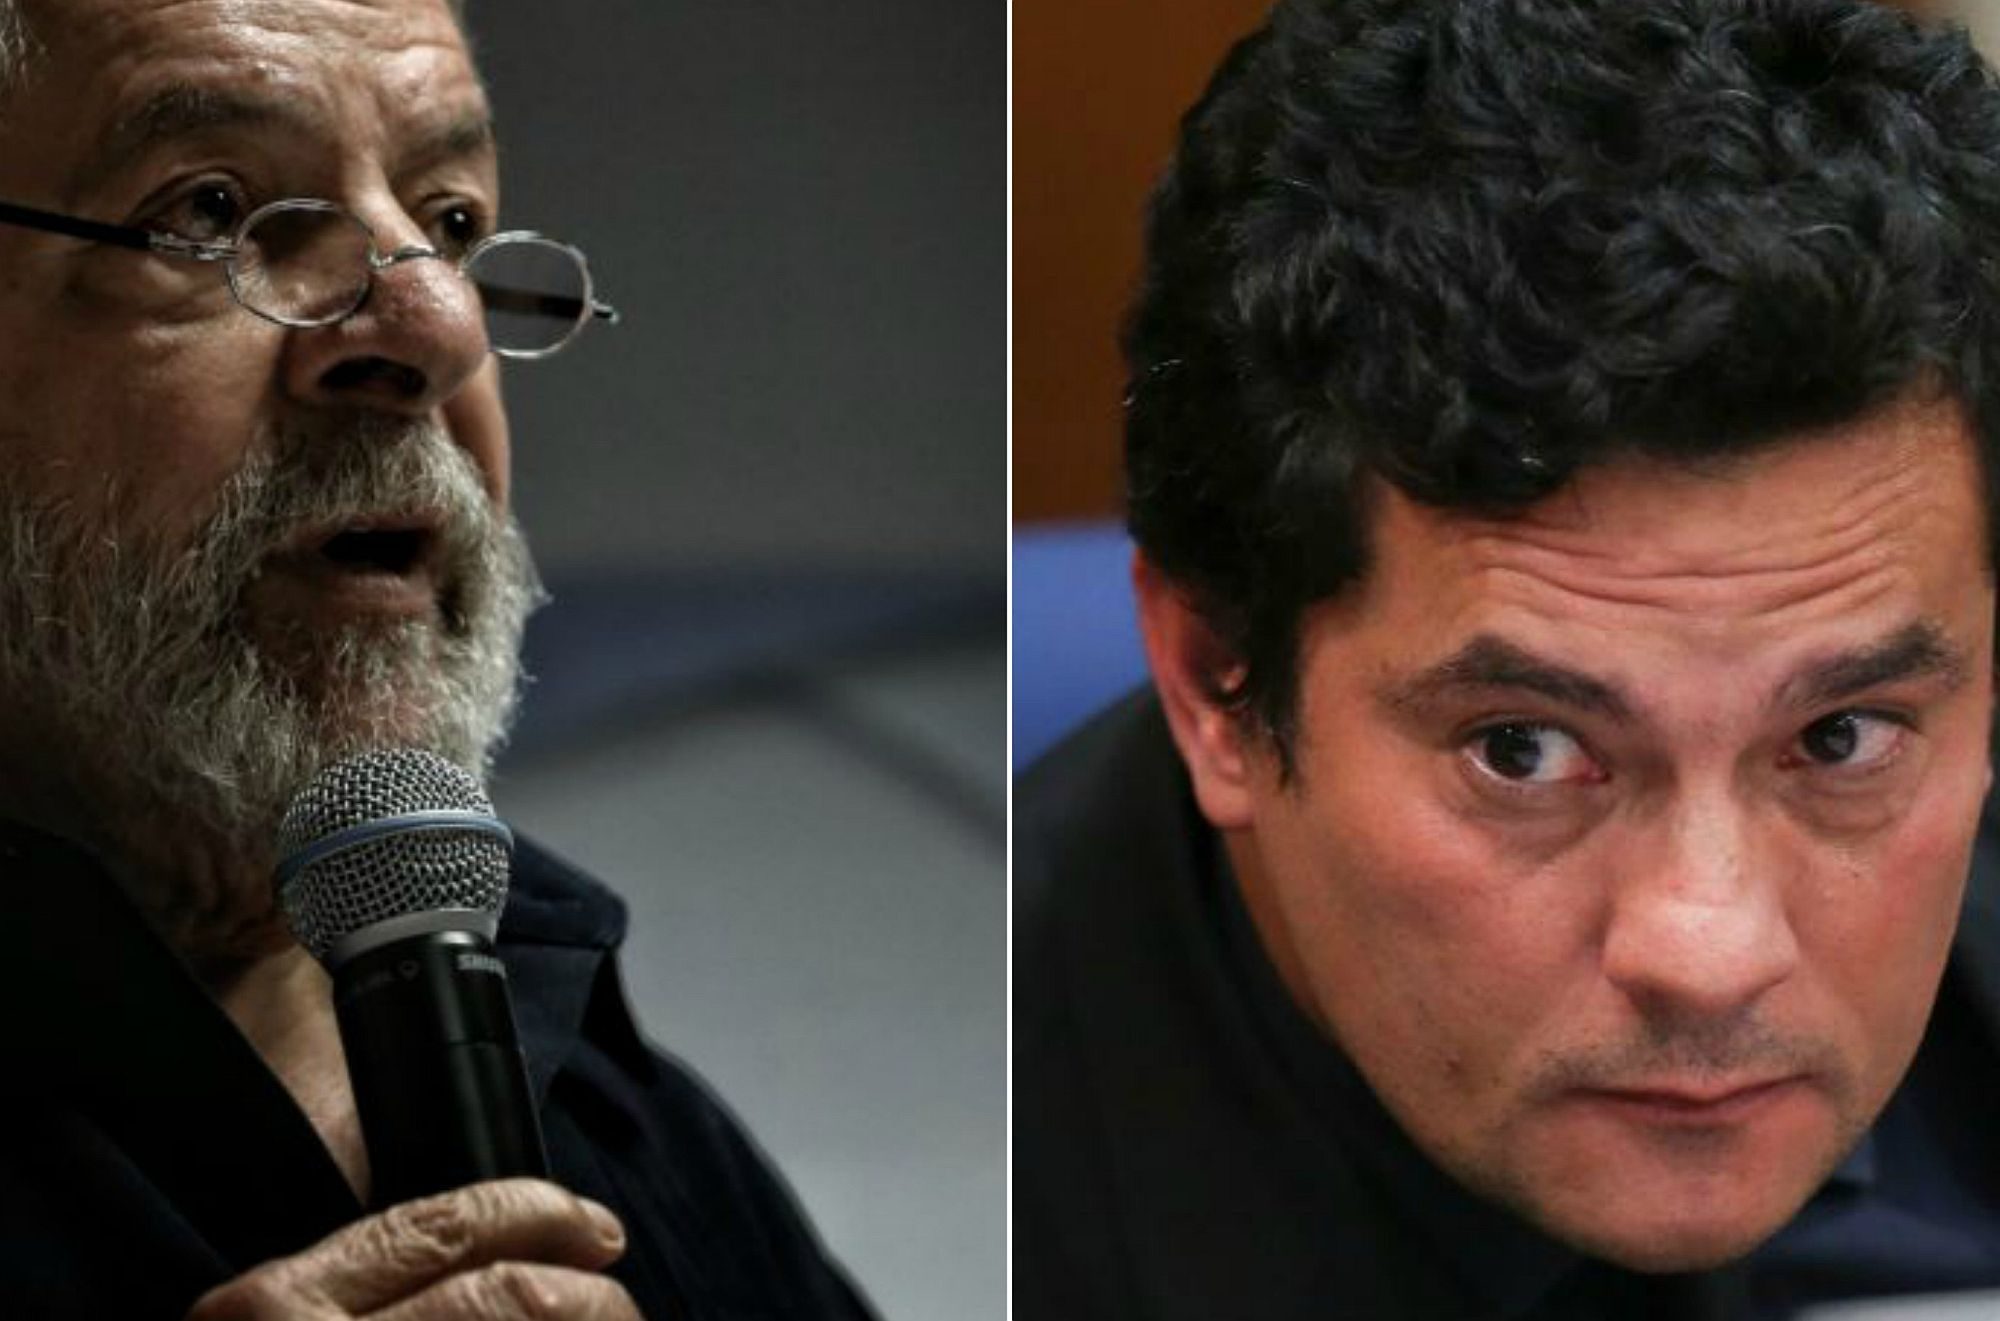 Sergio Moro, the stern judge and Lula, the popular former president